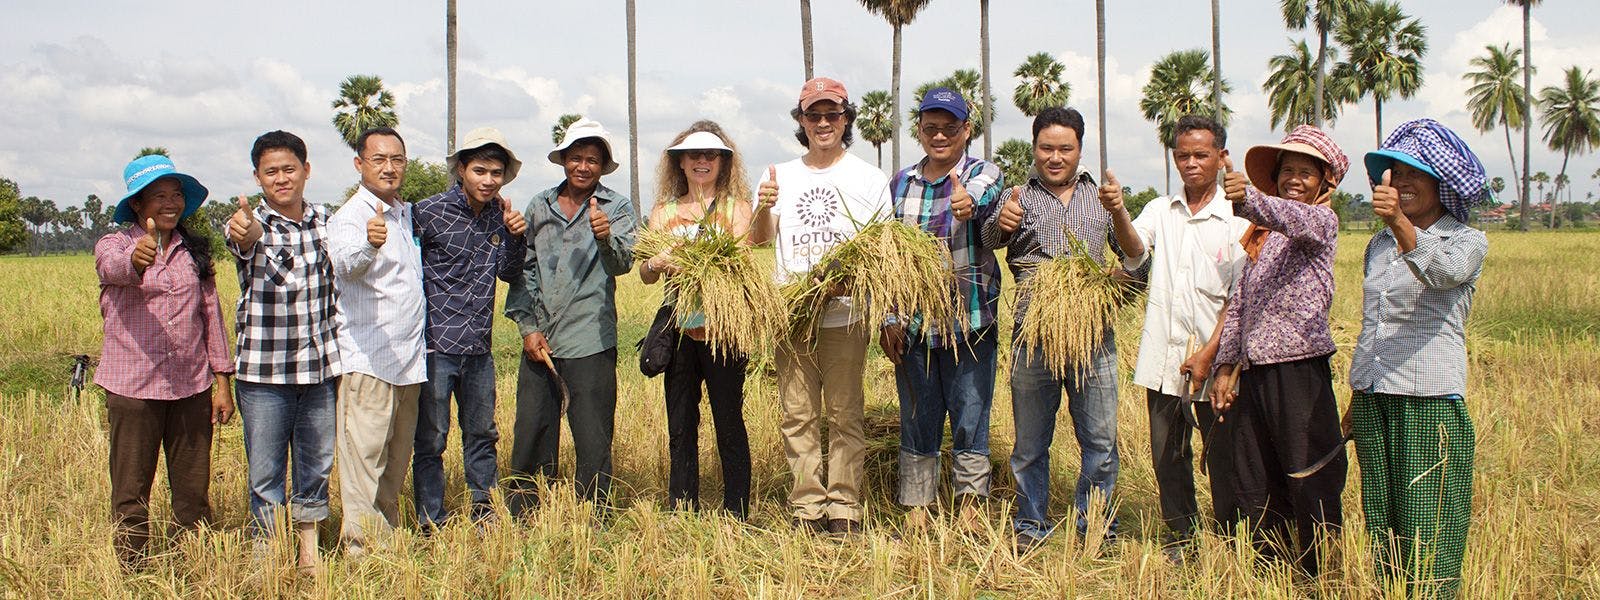 Ken Lee of Lotus Foods with farmers in Cambodia.